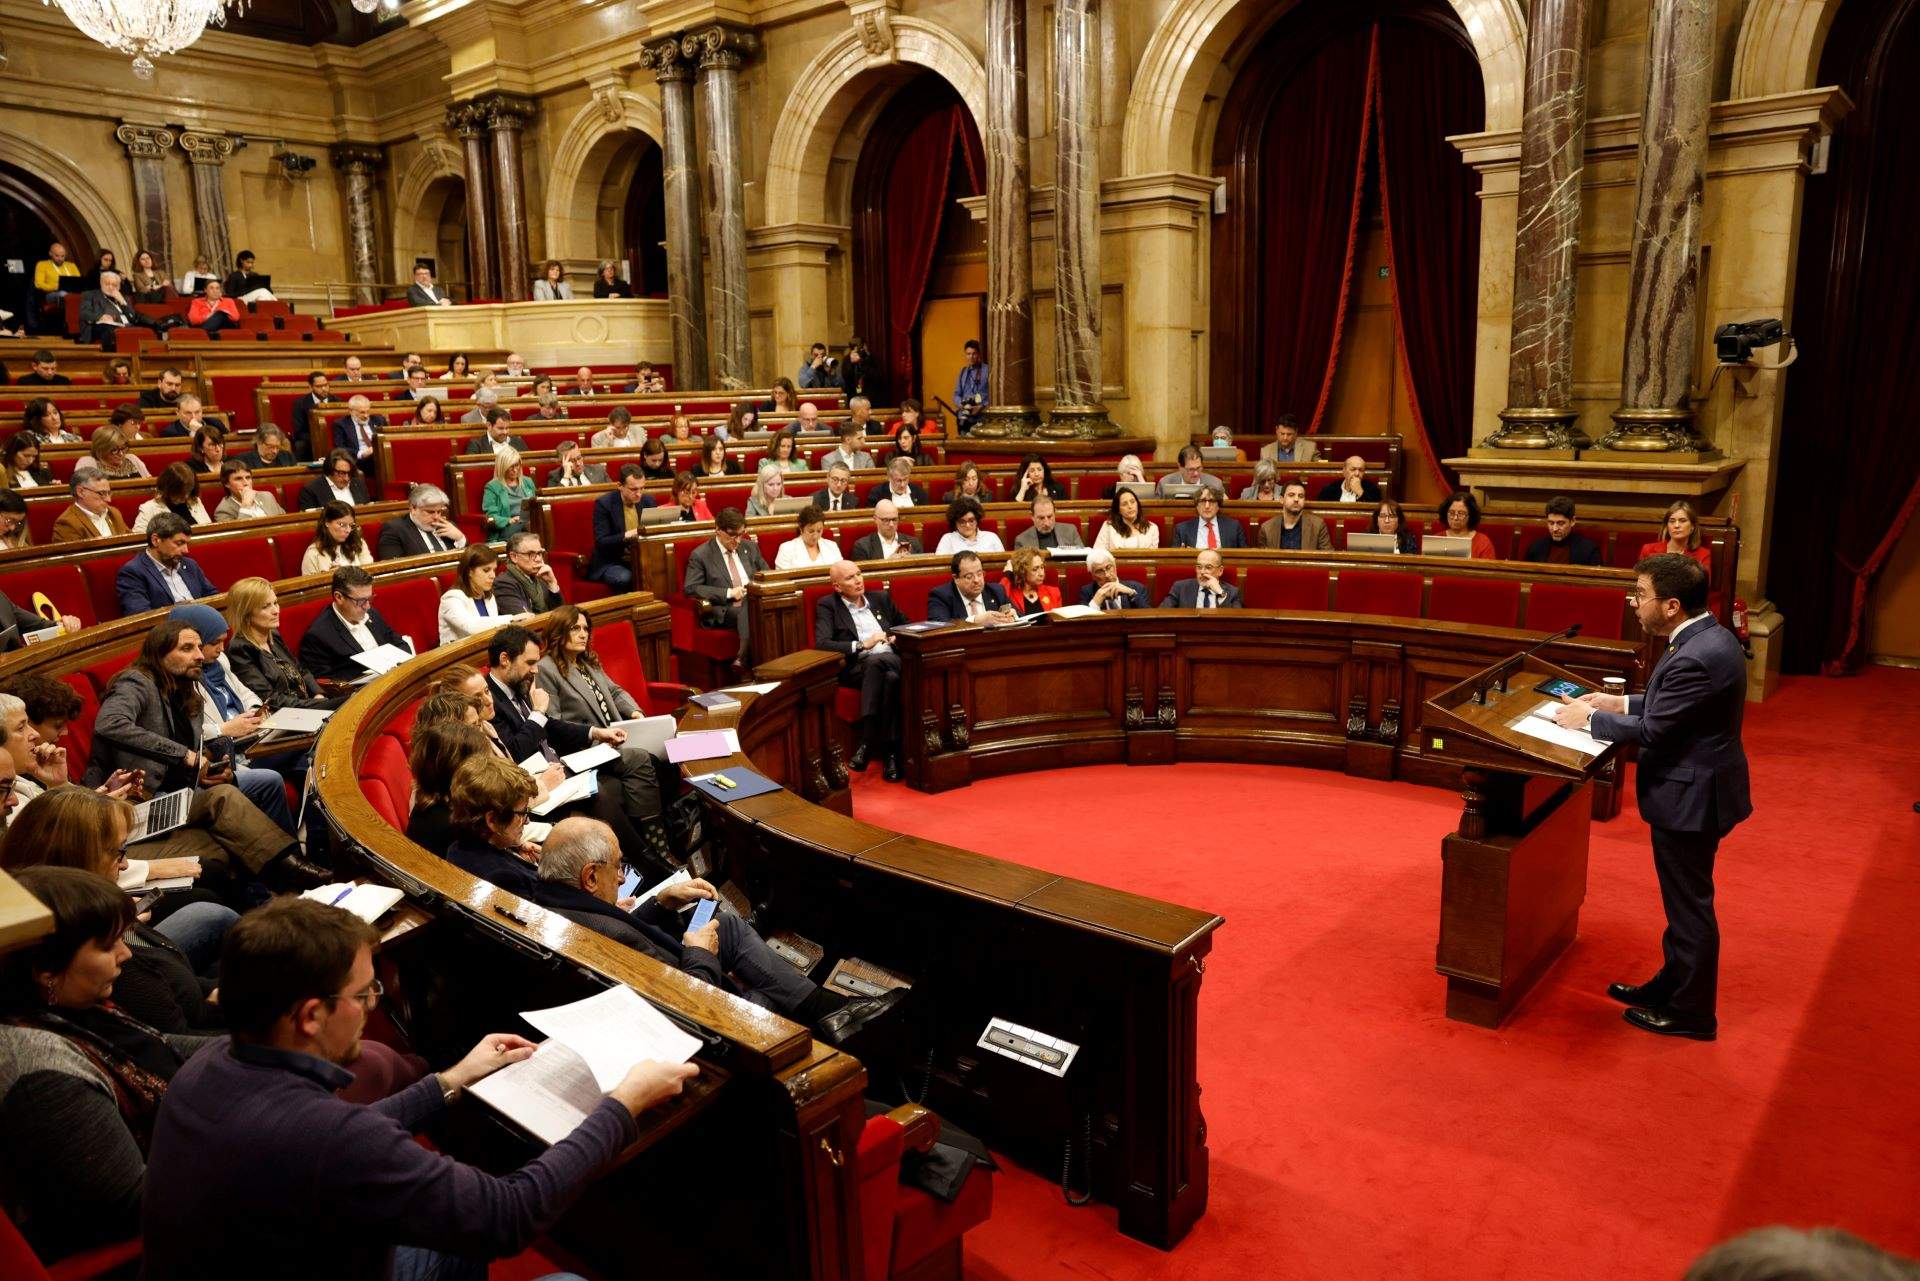 Pere Aragonès defends handling of Catalonia's drought but opposition rejects his discourse